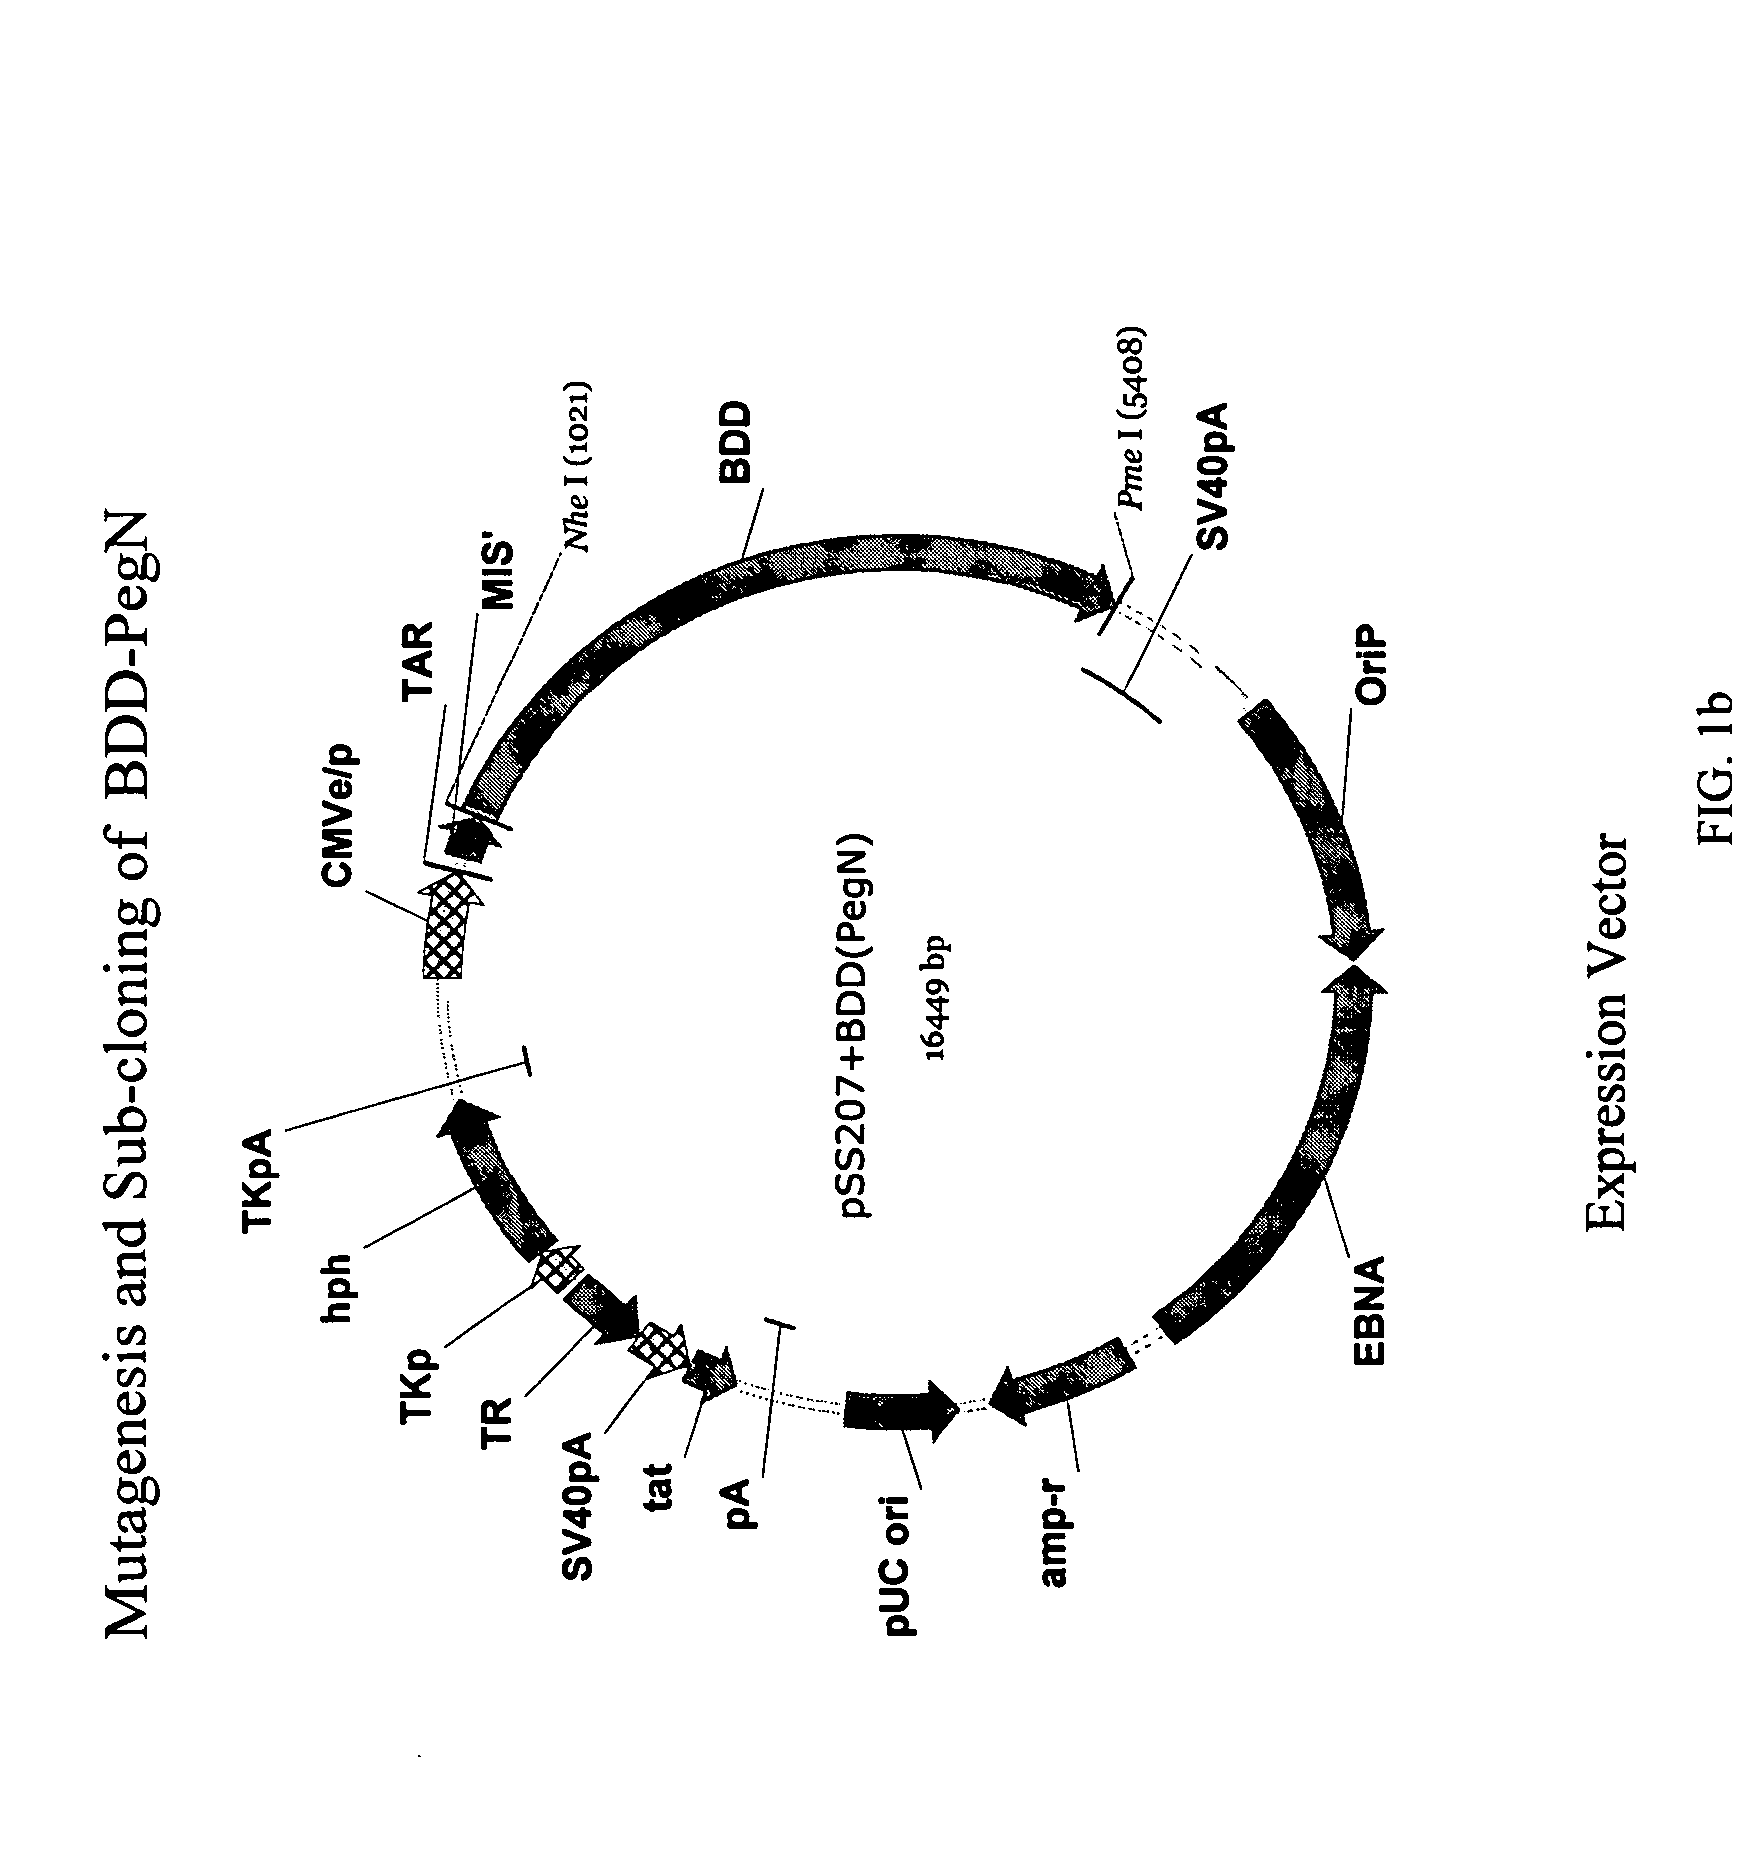 Site-directed modification of FVIII